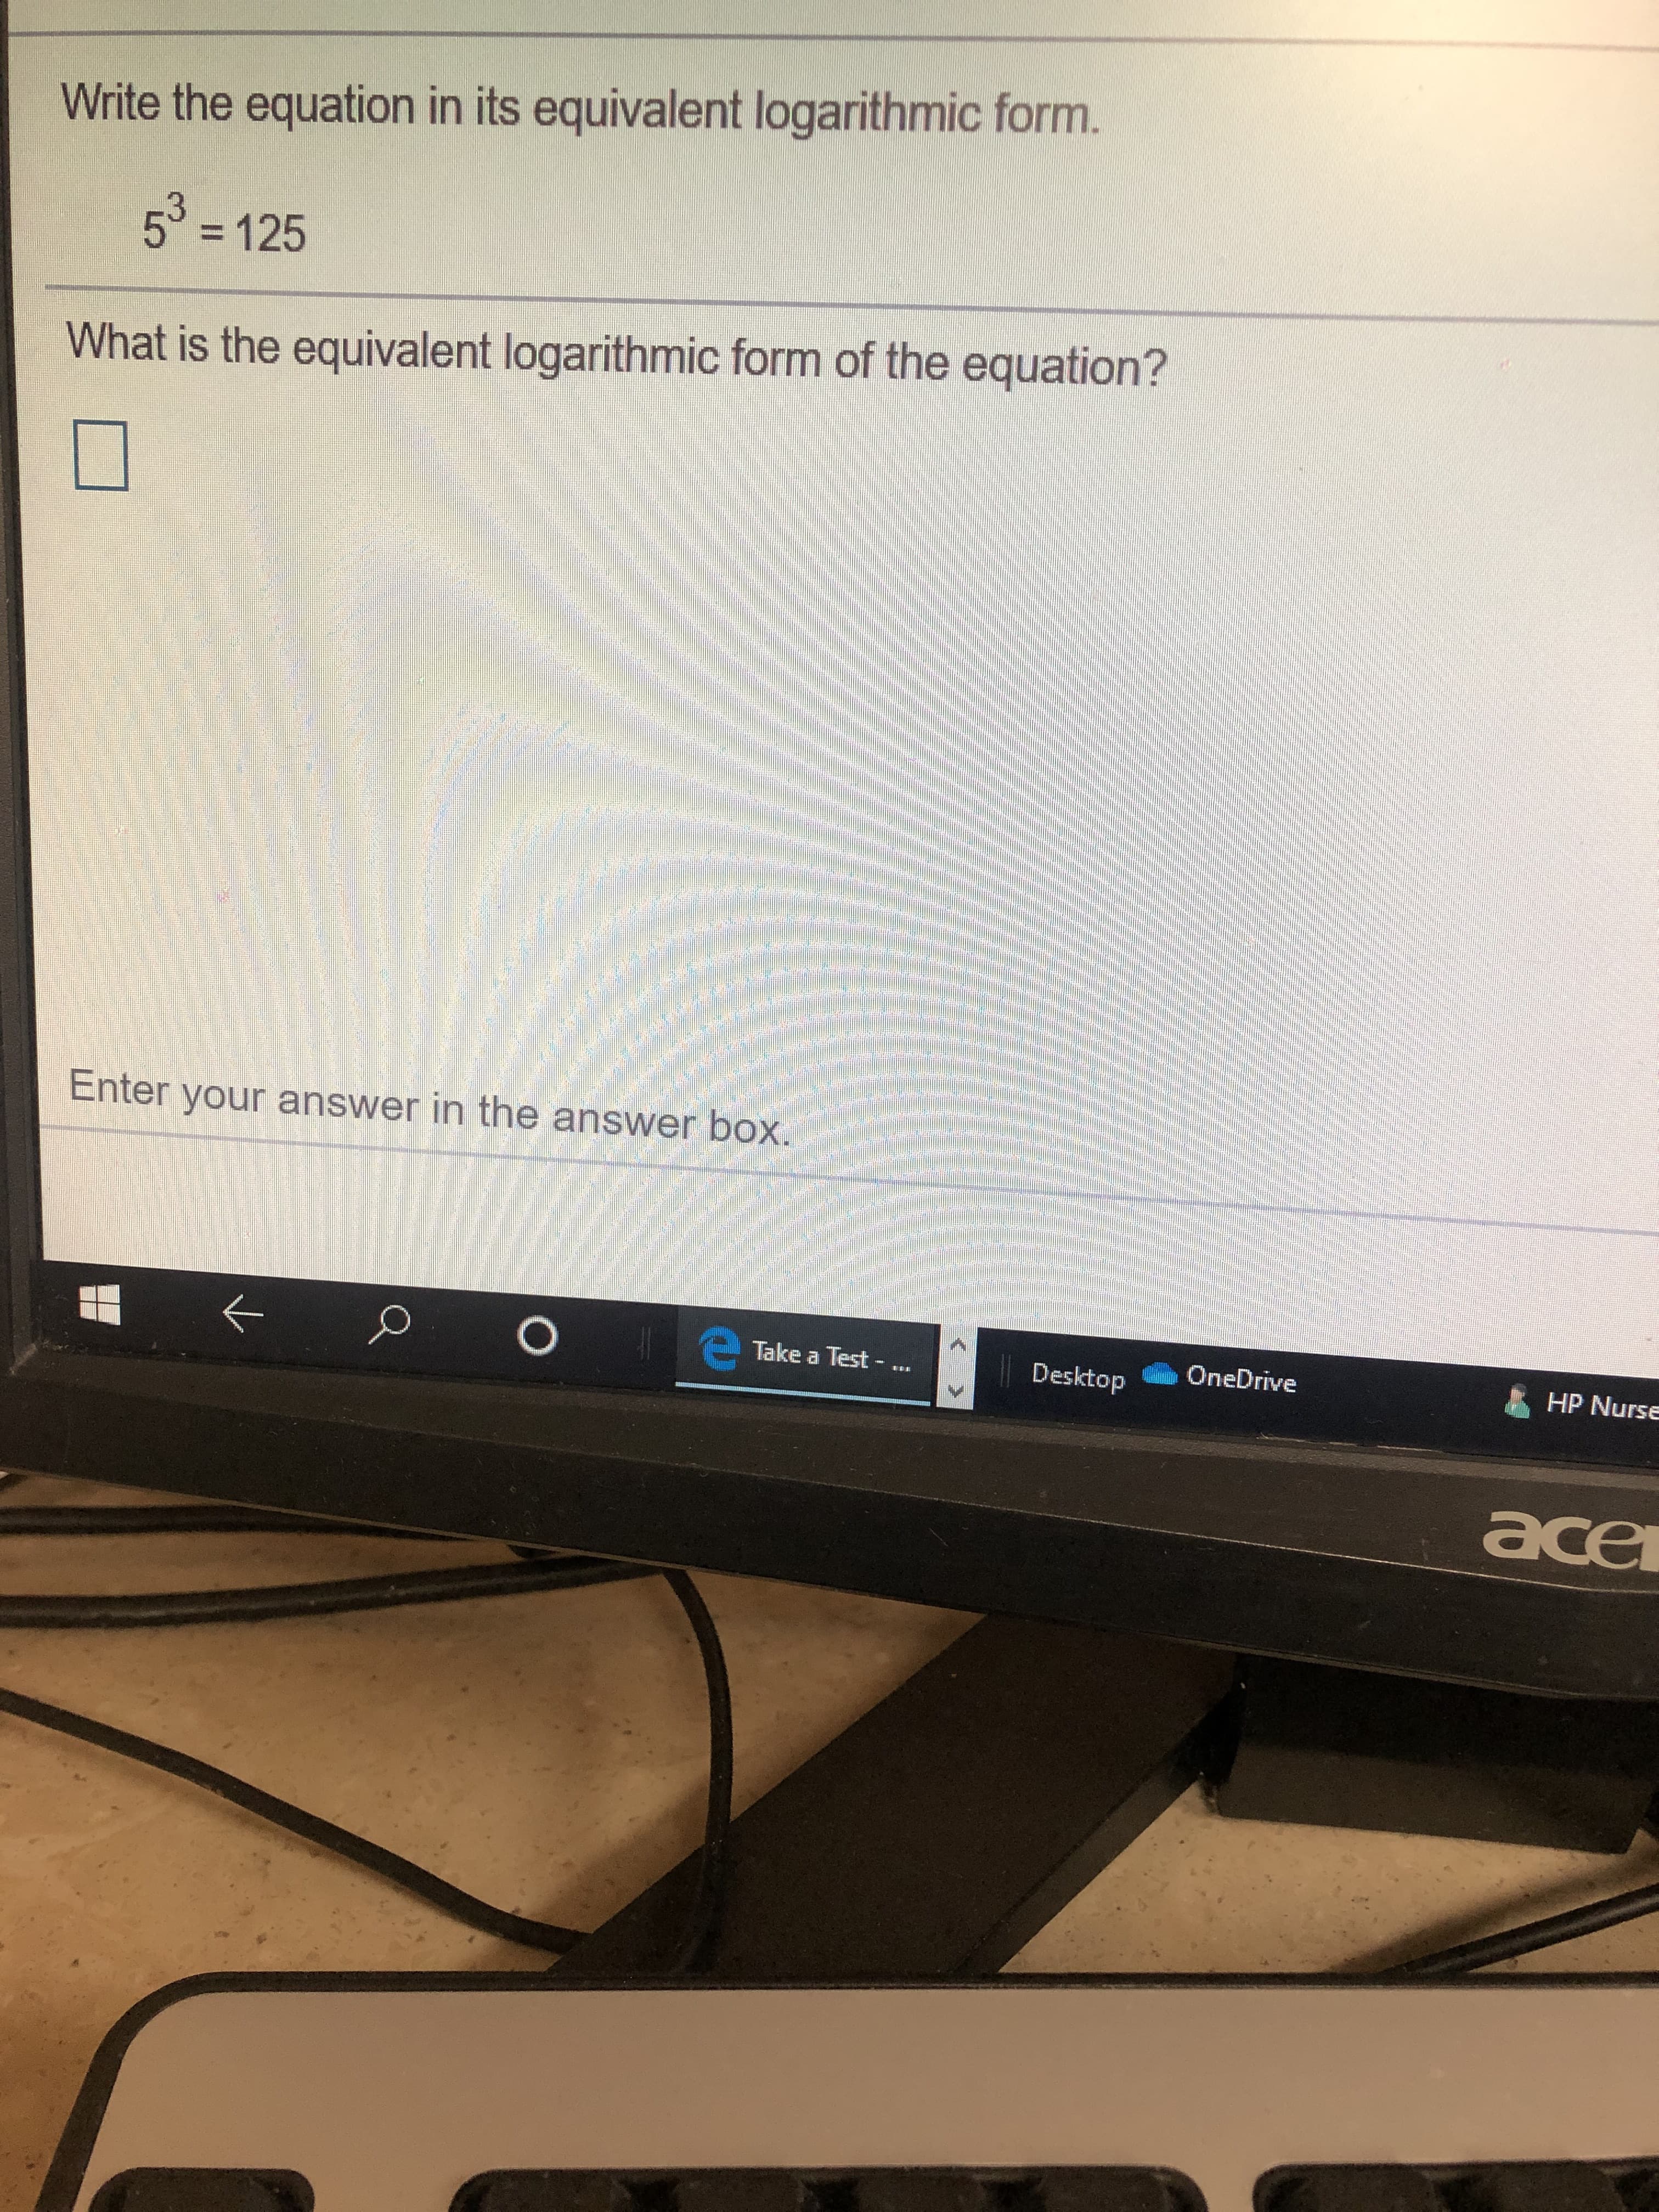 Write the equation in its equivalent logarithmic form.
5 125
What is the equivalent logarithmic form of the equation?
Enter your answer in the answer box.
Take a Test -
OneDrive
Desktop
HP Nurse
ace
